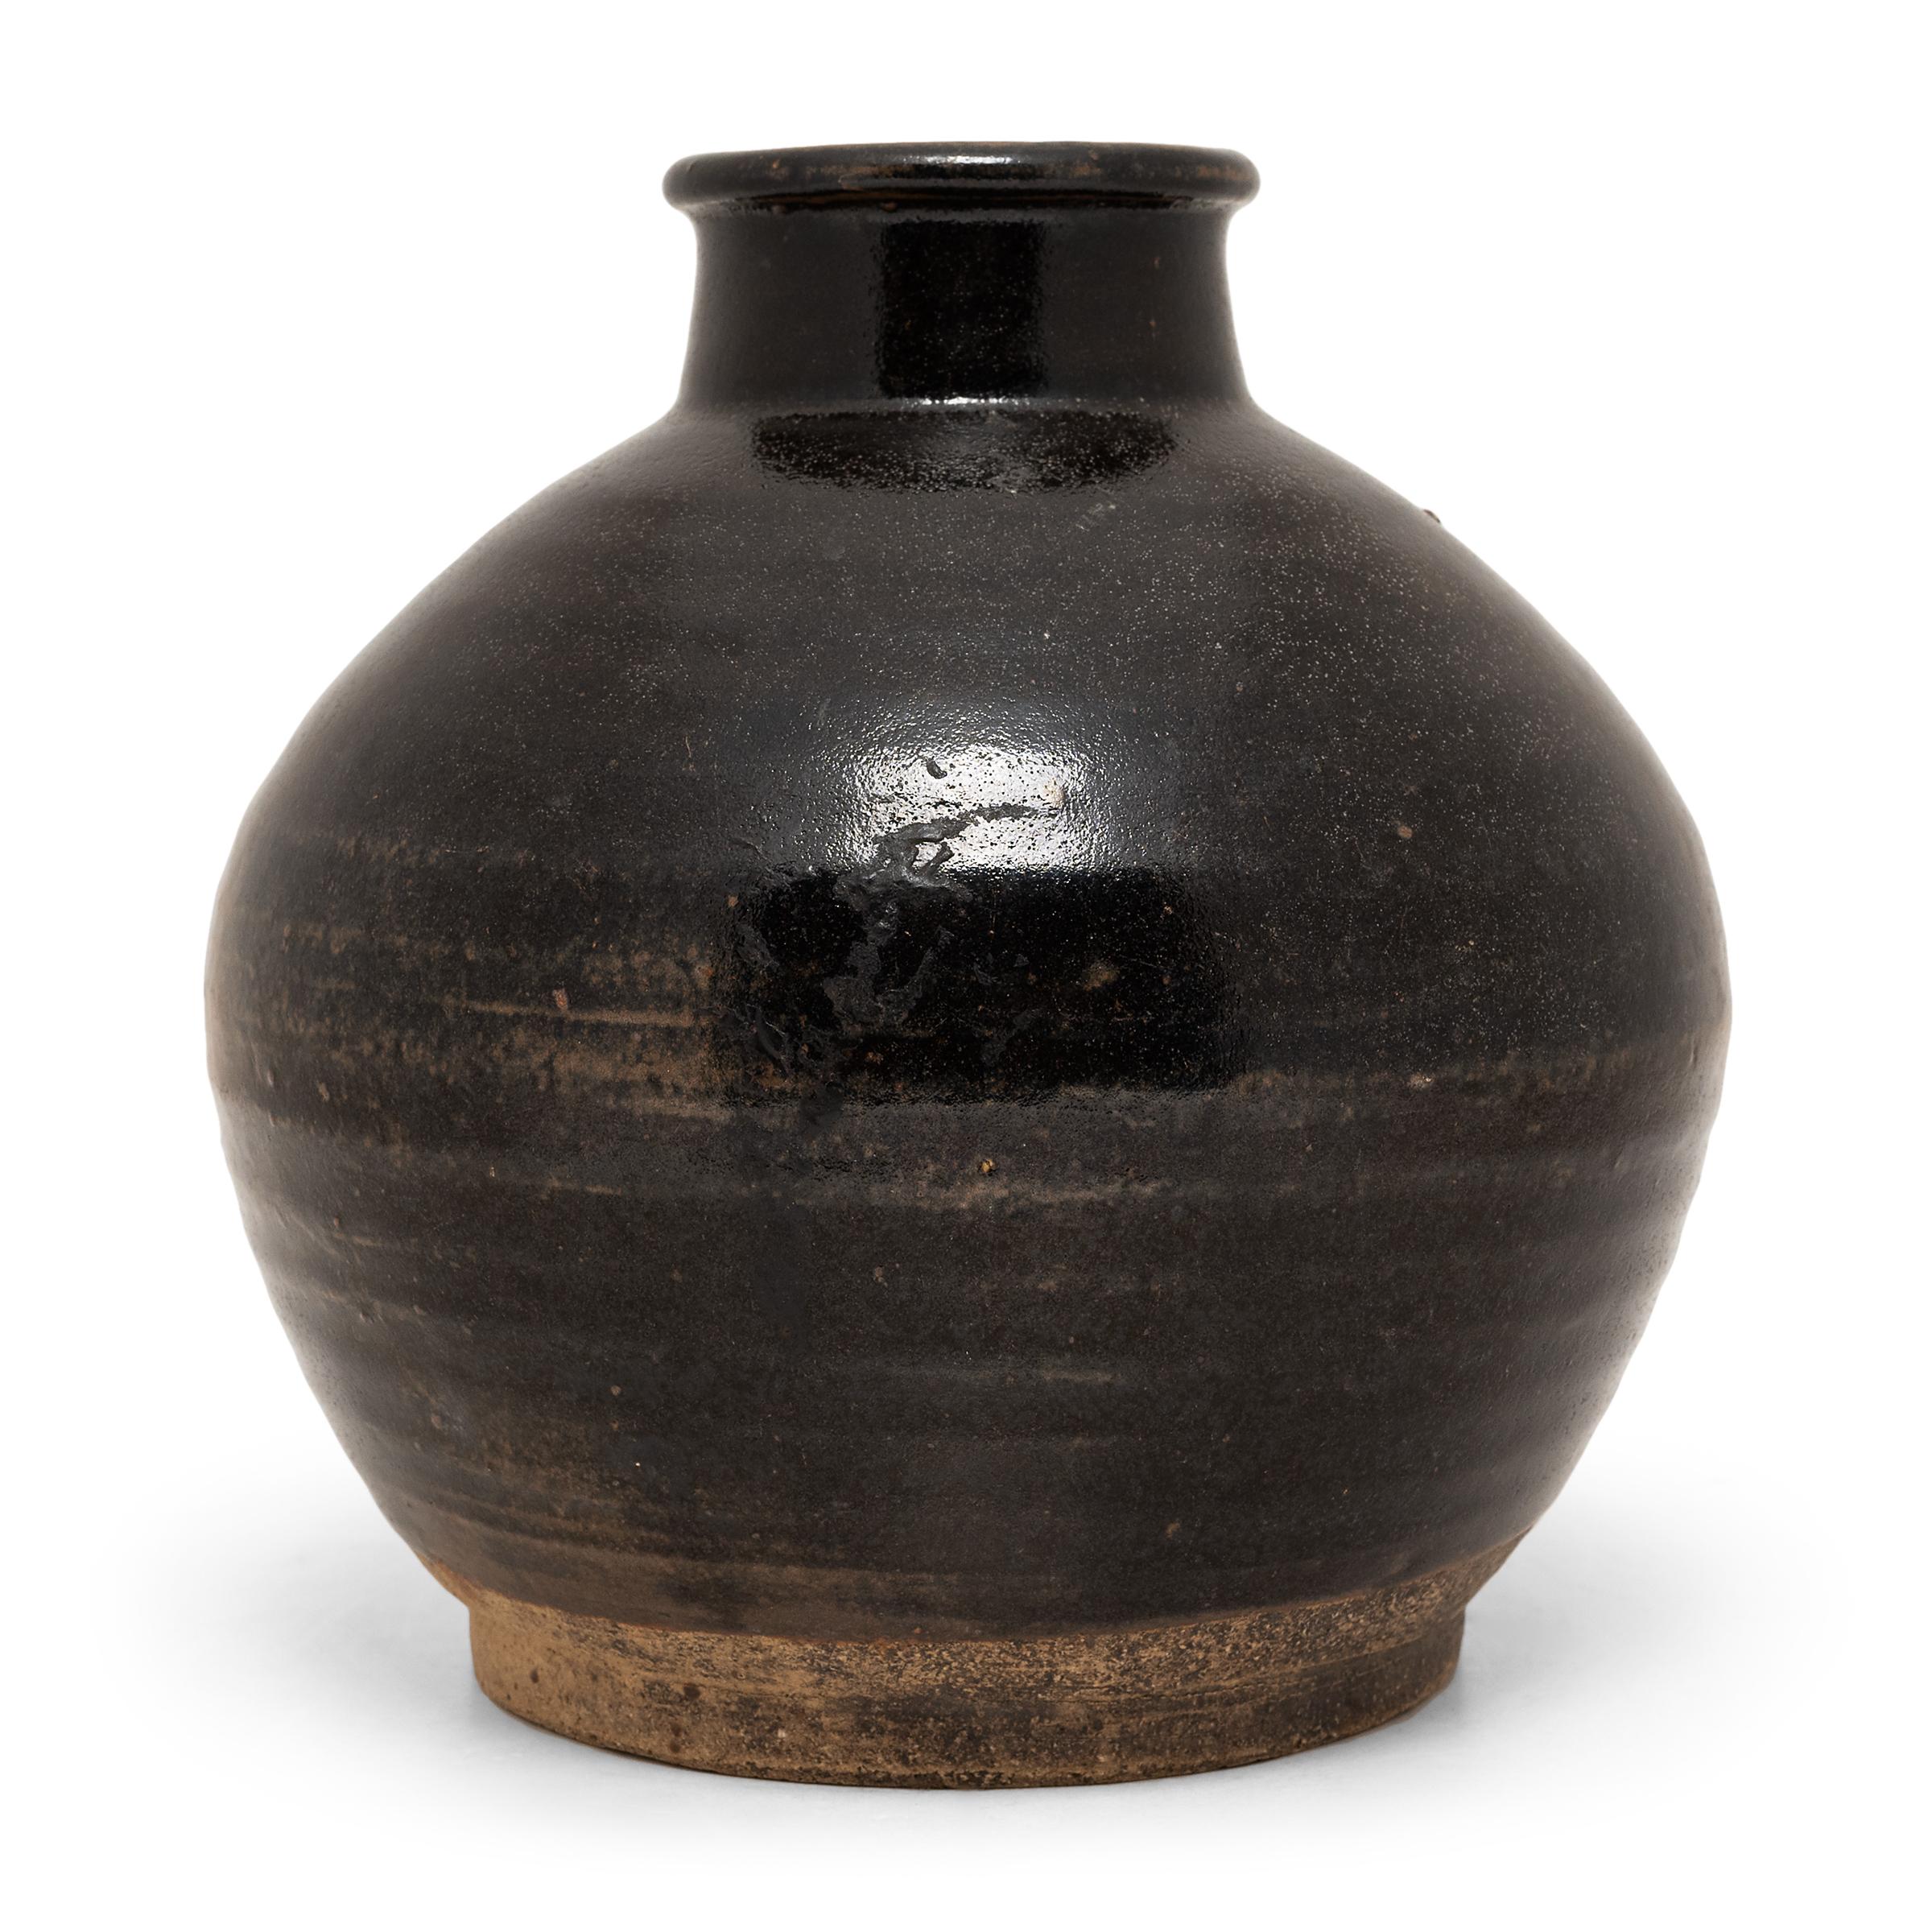 A rich brown glaze coats the surface of this round wine jar, lingering on subtle ridges ringing the body to create a pattern of light and dark. Crafted in the early 20th century, the jar was once used in a Qing-dynasty apothecary to store wines